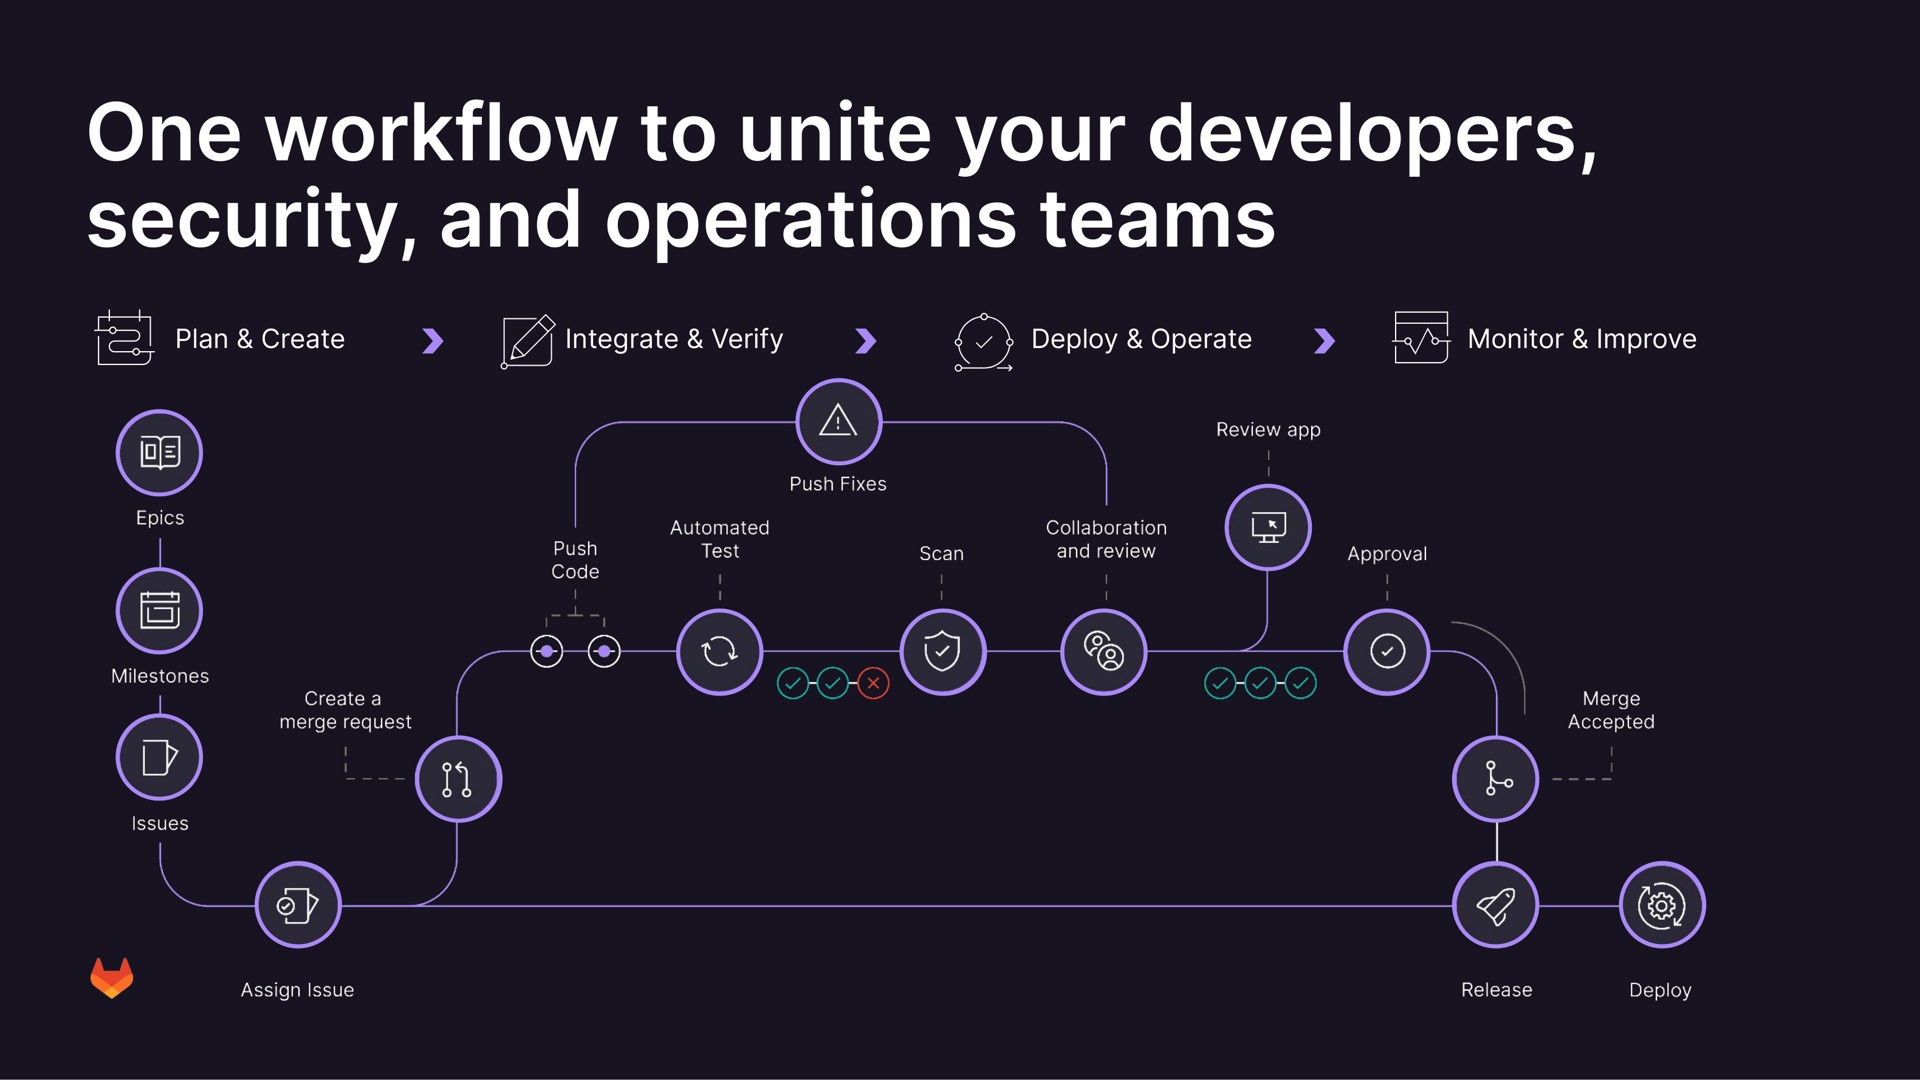 one to unite your developers security and operations teams | GitLab